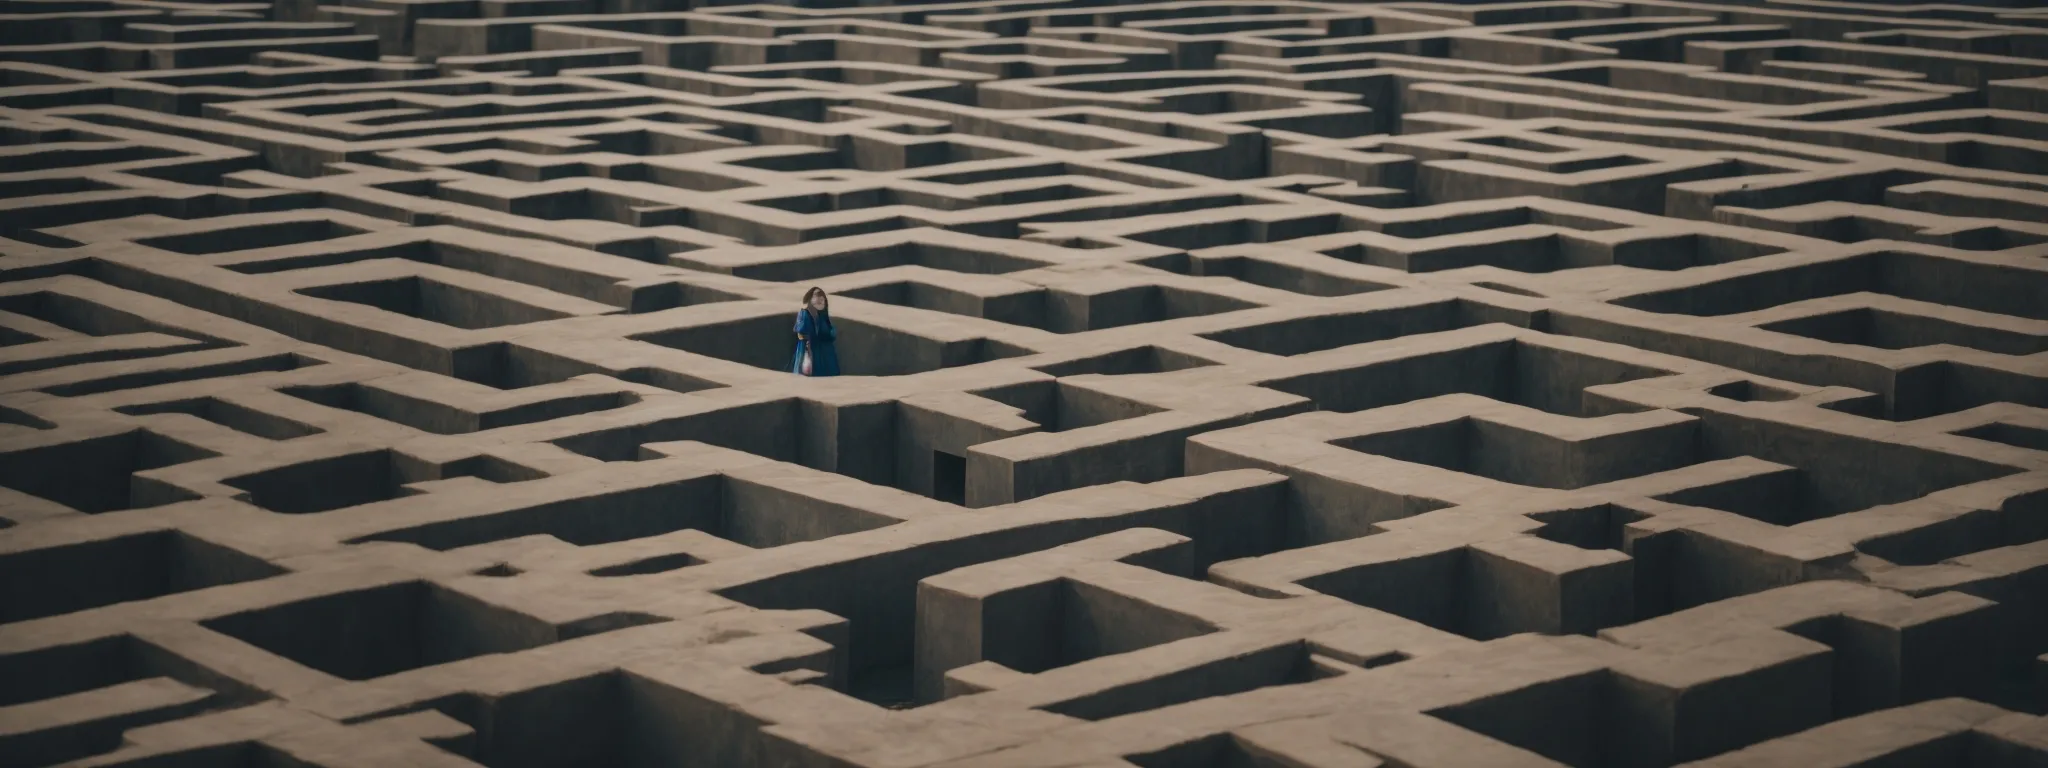 a person standing at the entrance of a large maze, symbolizing the beginning of the journey to understanding user's search intentions.